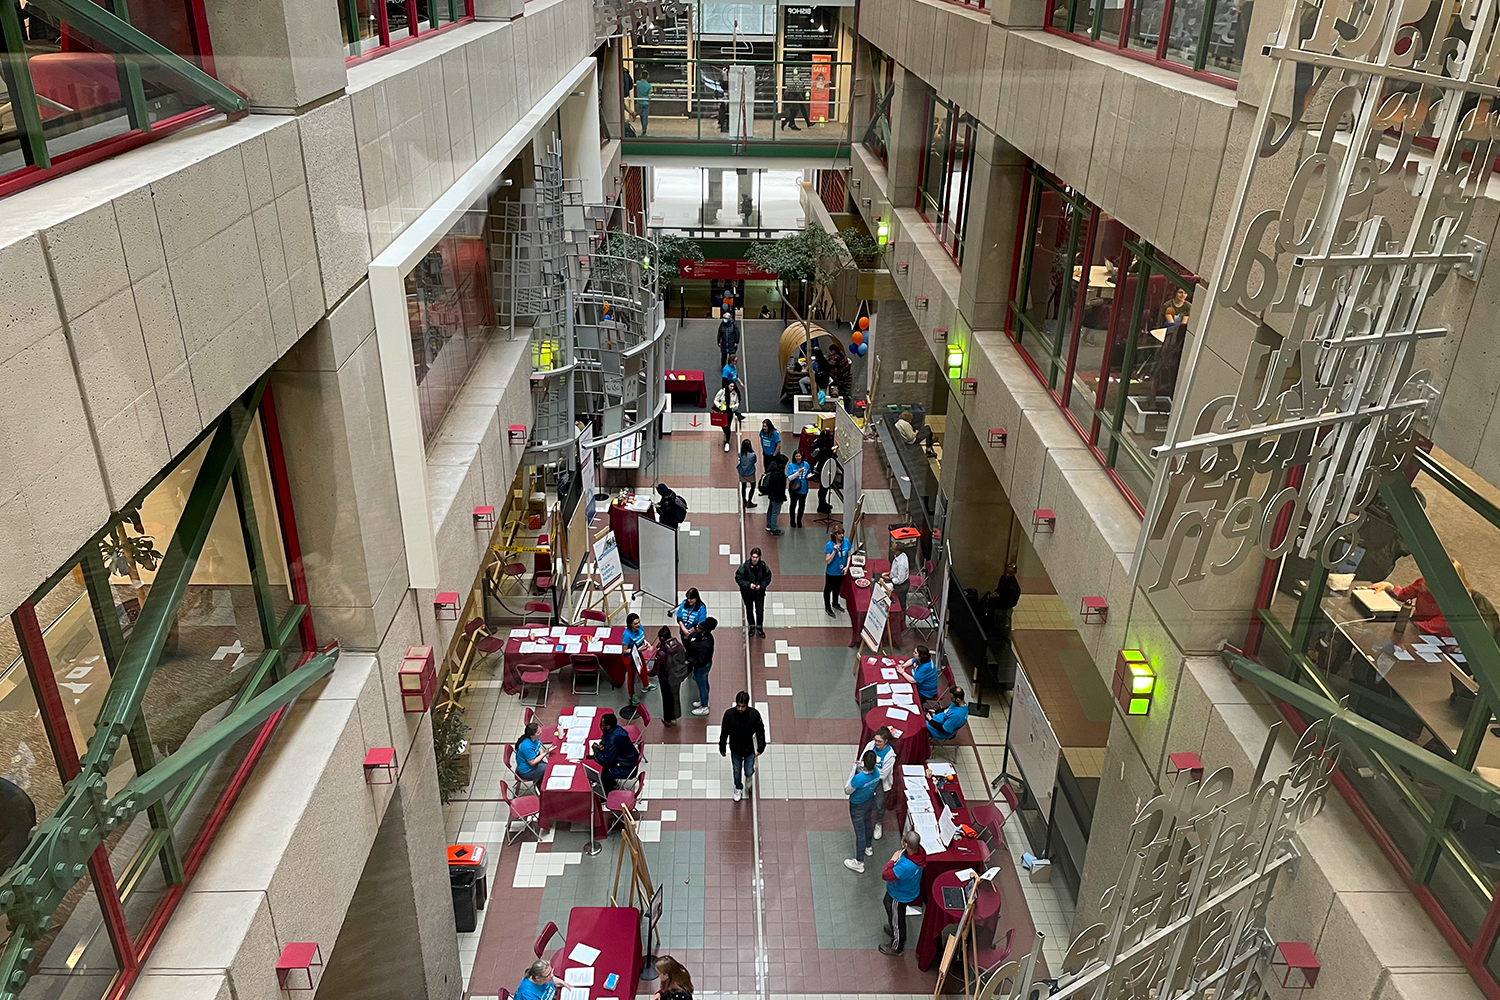 birds eye view of the Concordia library